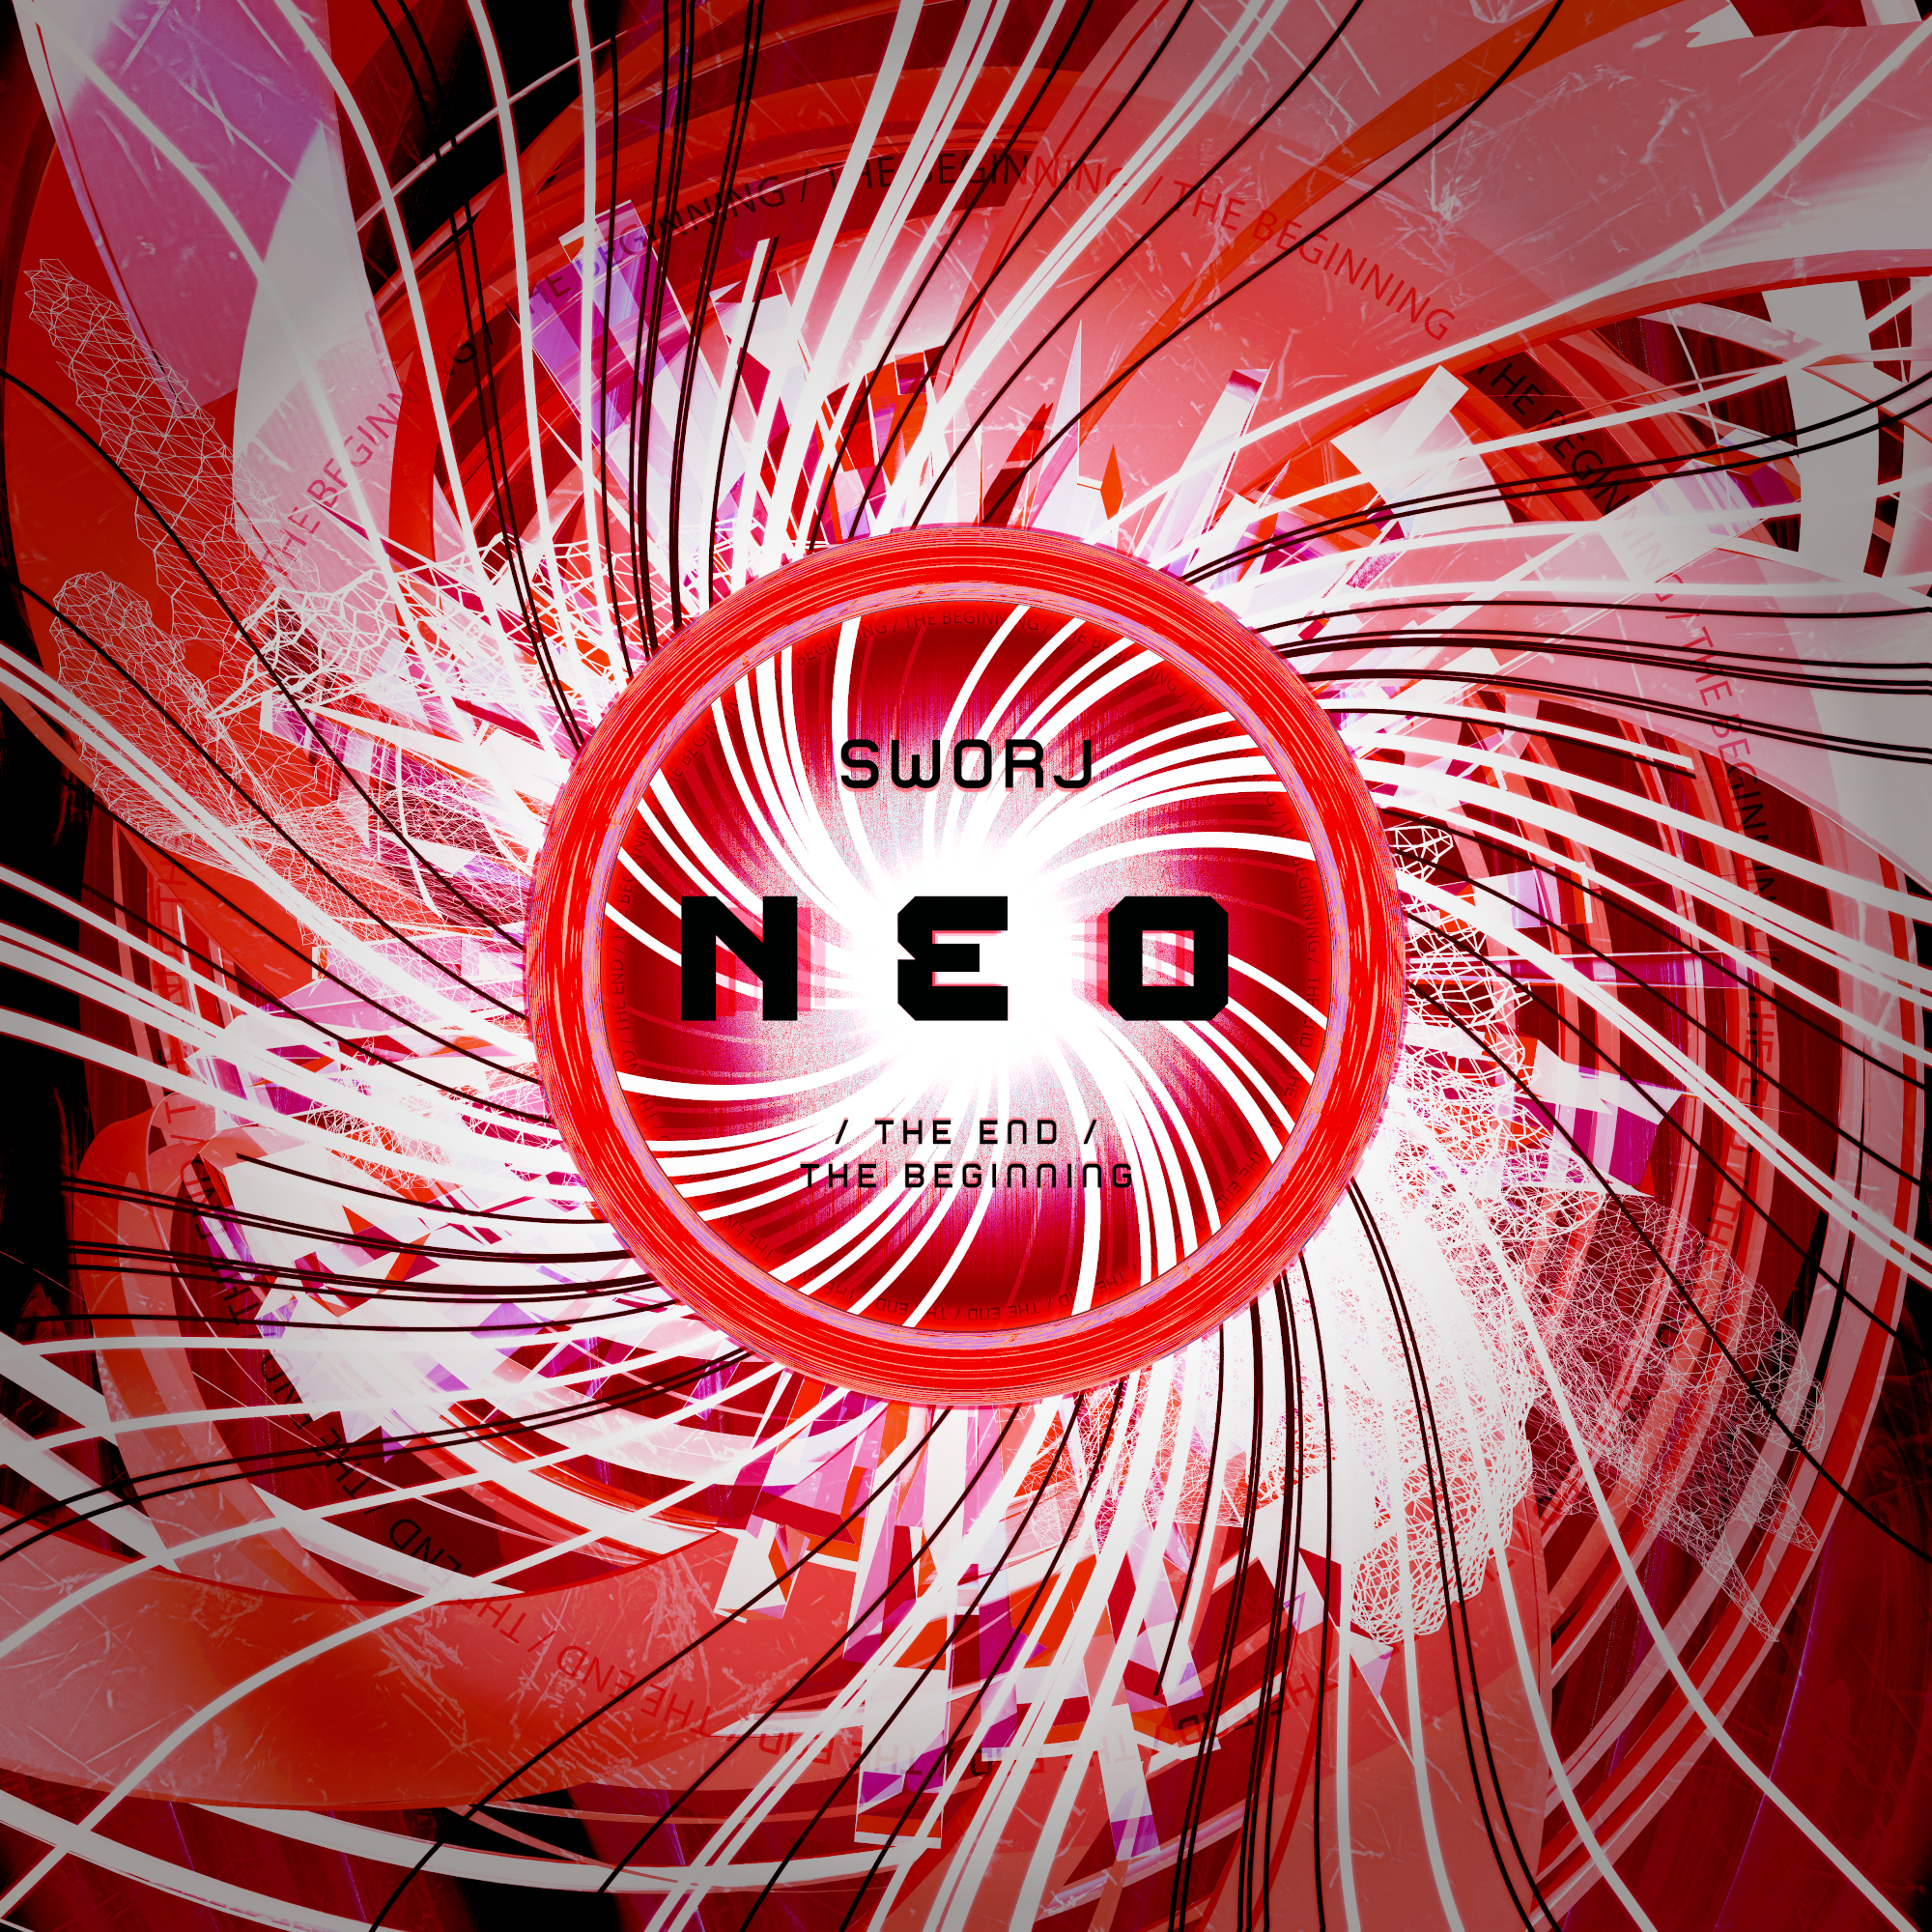 Cover art for the single NEO.